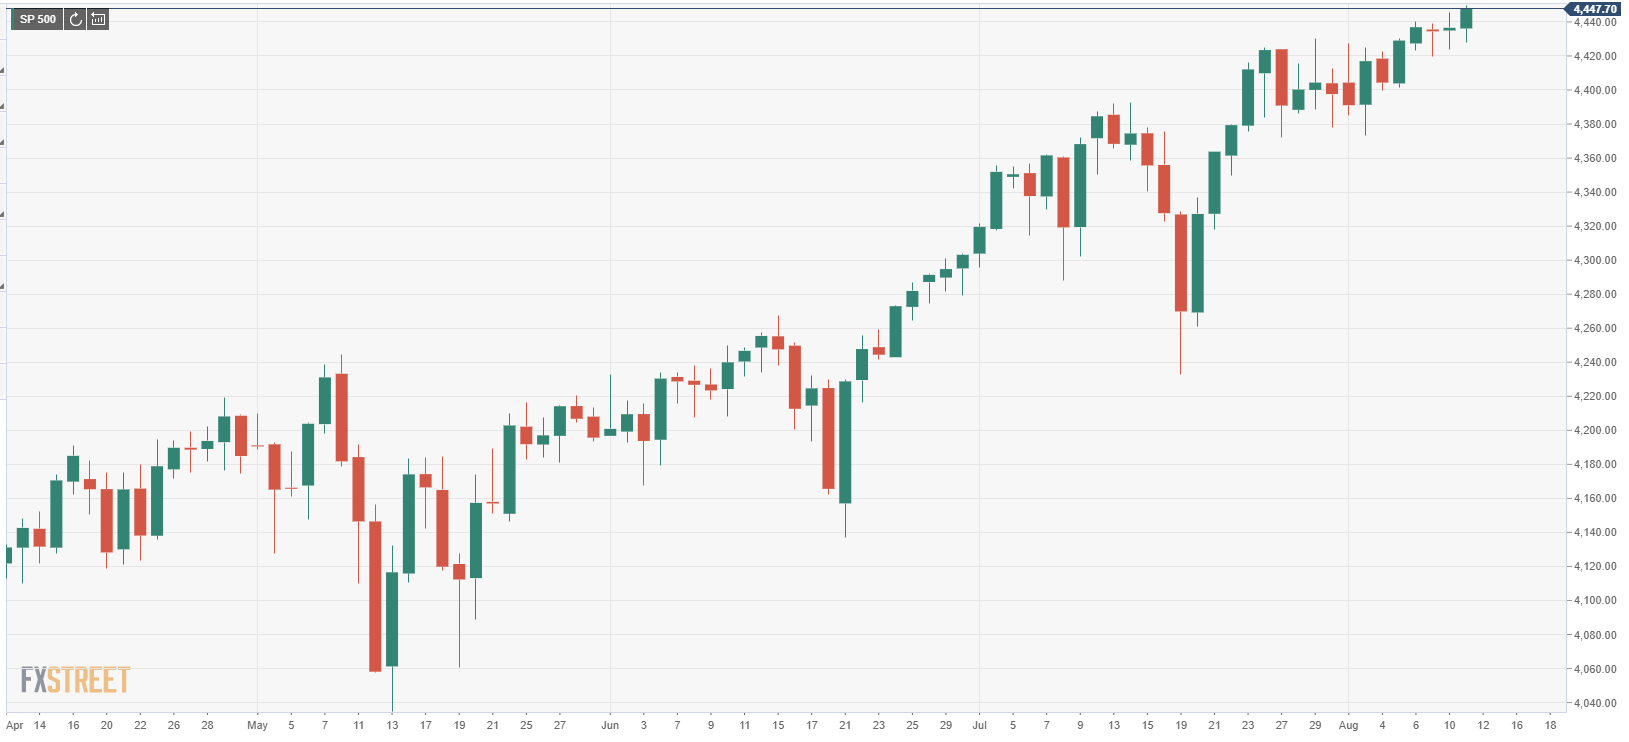 S&P 500 Index hits new high above 4,440